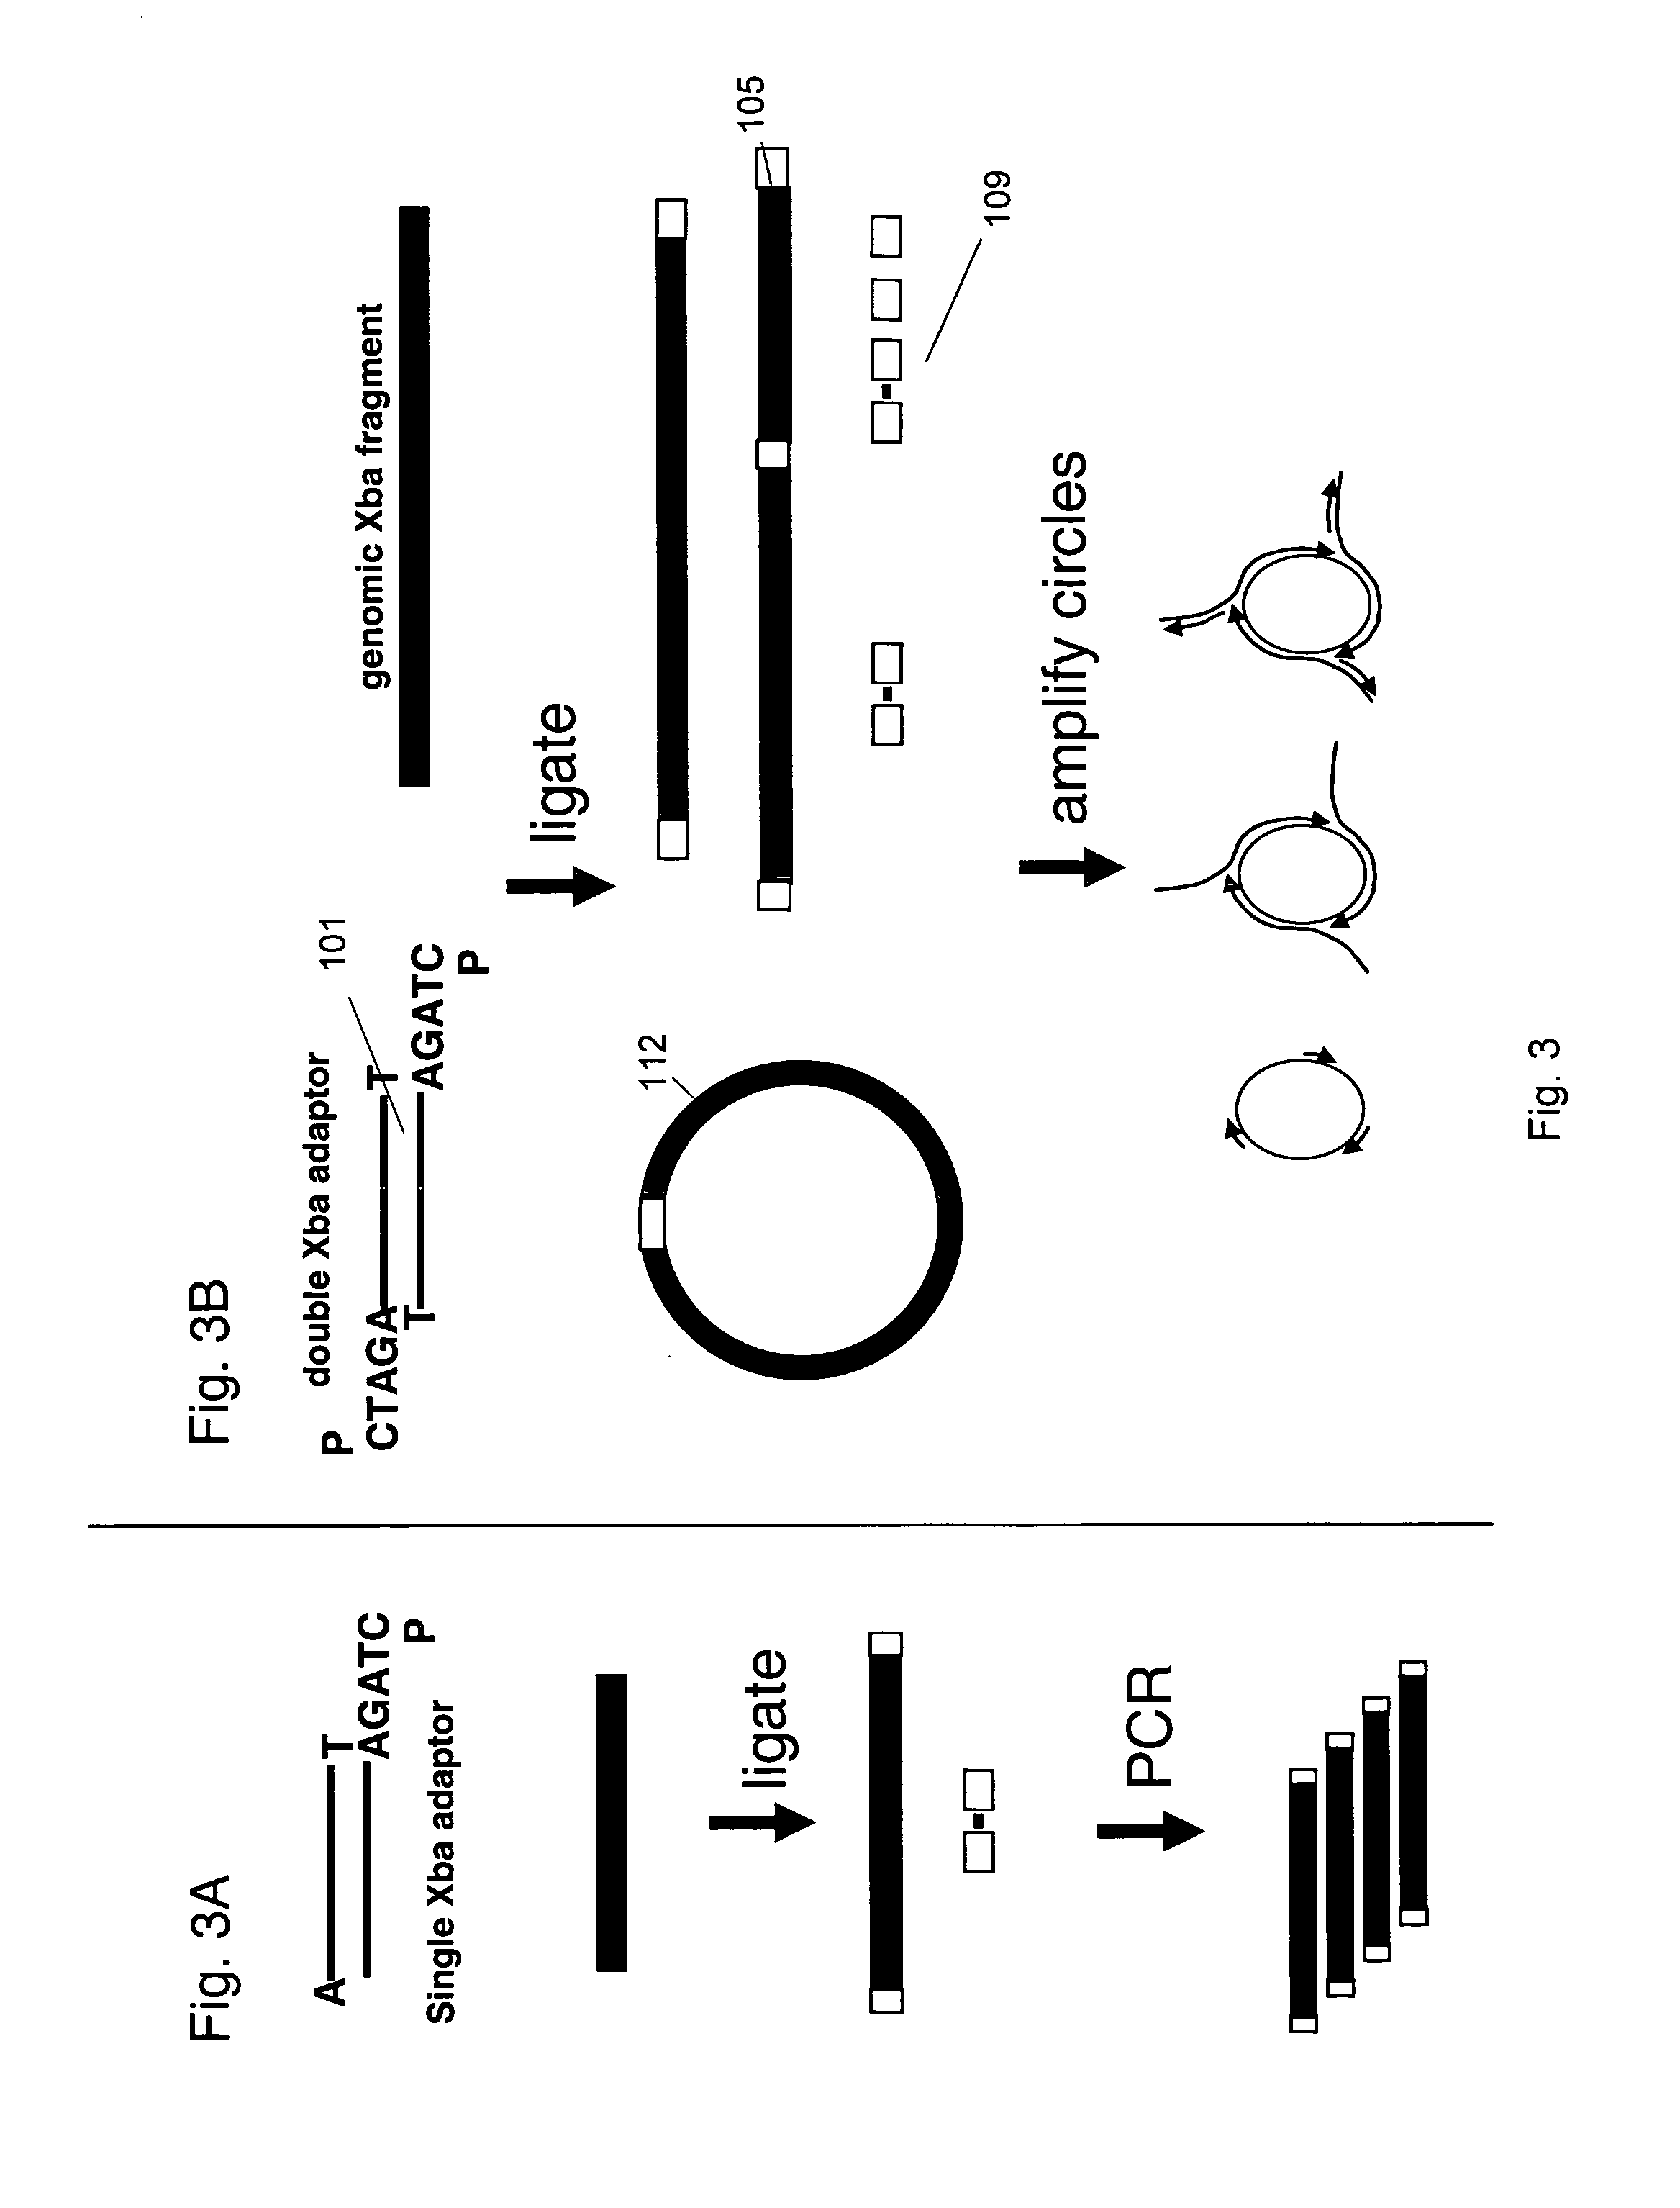 Methods for normalized amplification of nucleic acids